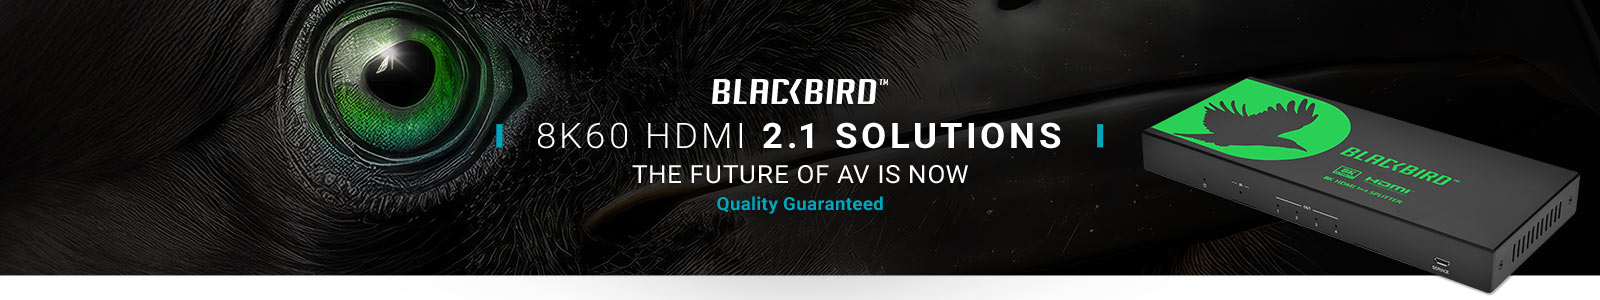 NEW (tag)
Blackbird (logo)
8K60 HDMI
The Future Of AV Is Now
Quality Guaranteed
Shop Now